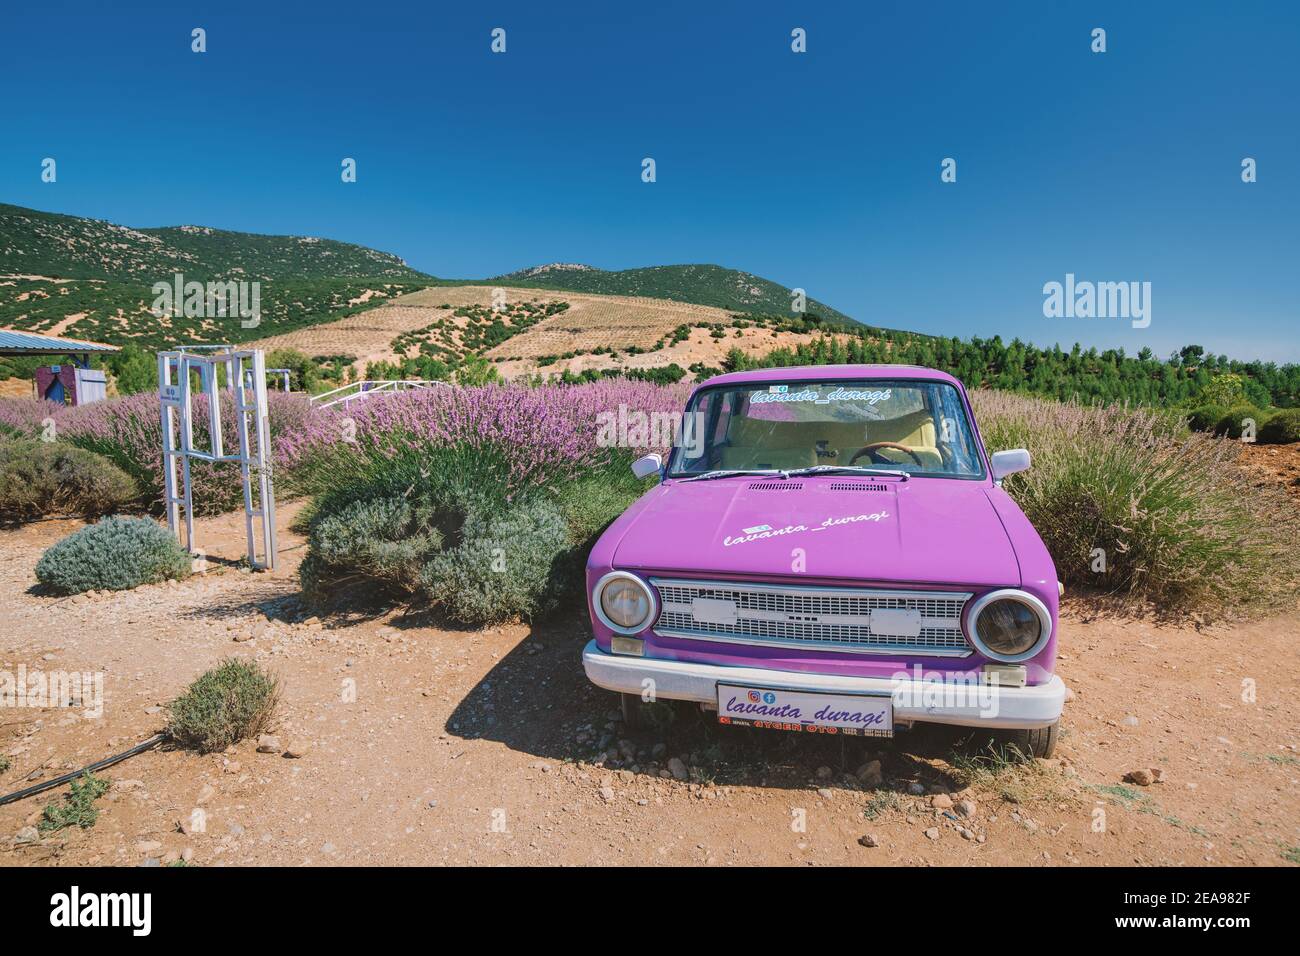 07 September 2020, Isparta, Turkey: Decorative car and swing in the middle of a lavender field. Outdoor photo shooting spot for selfies and social net Stock Photo